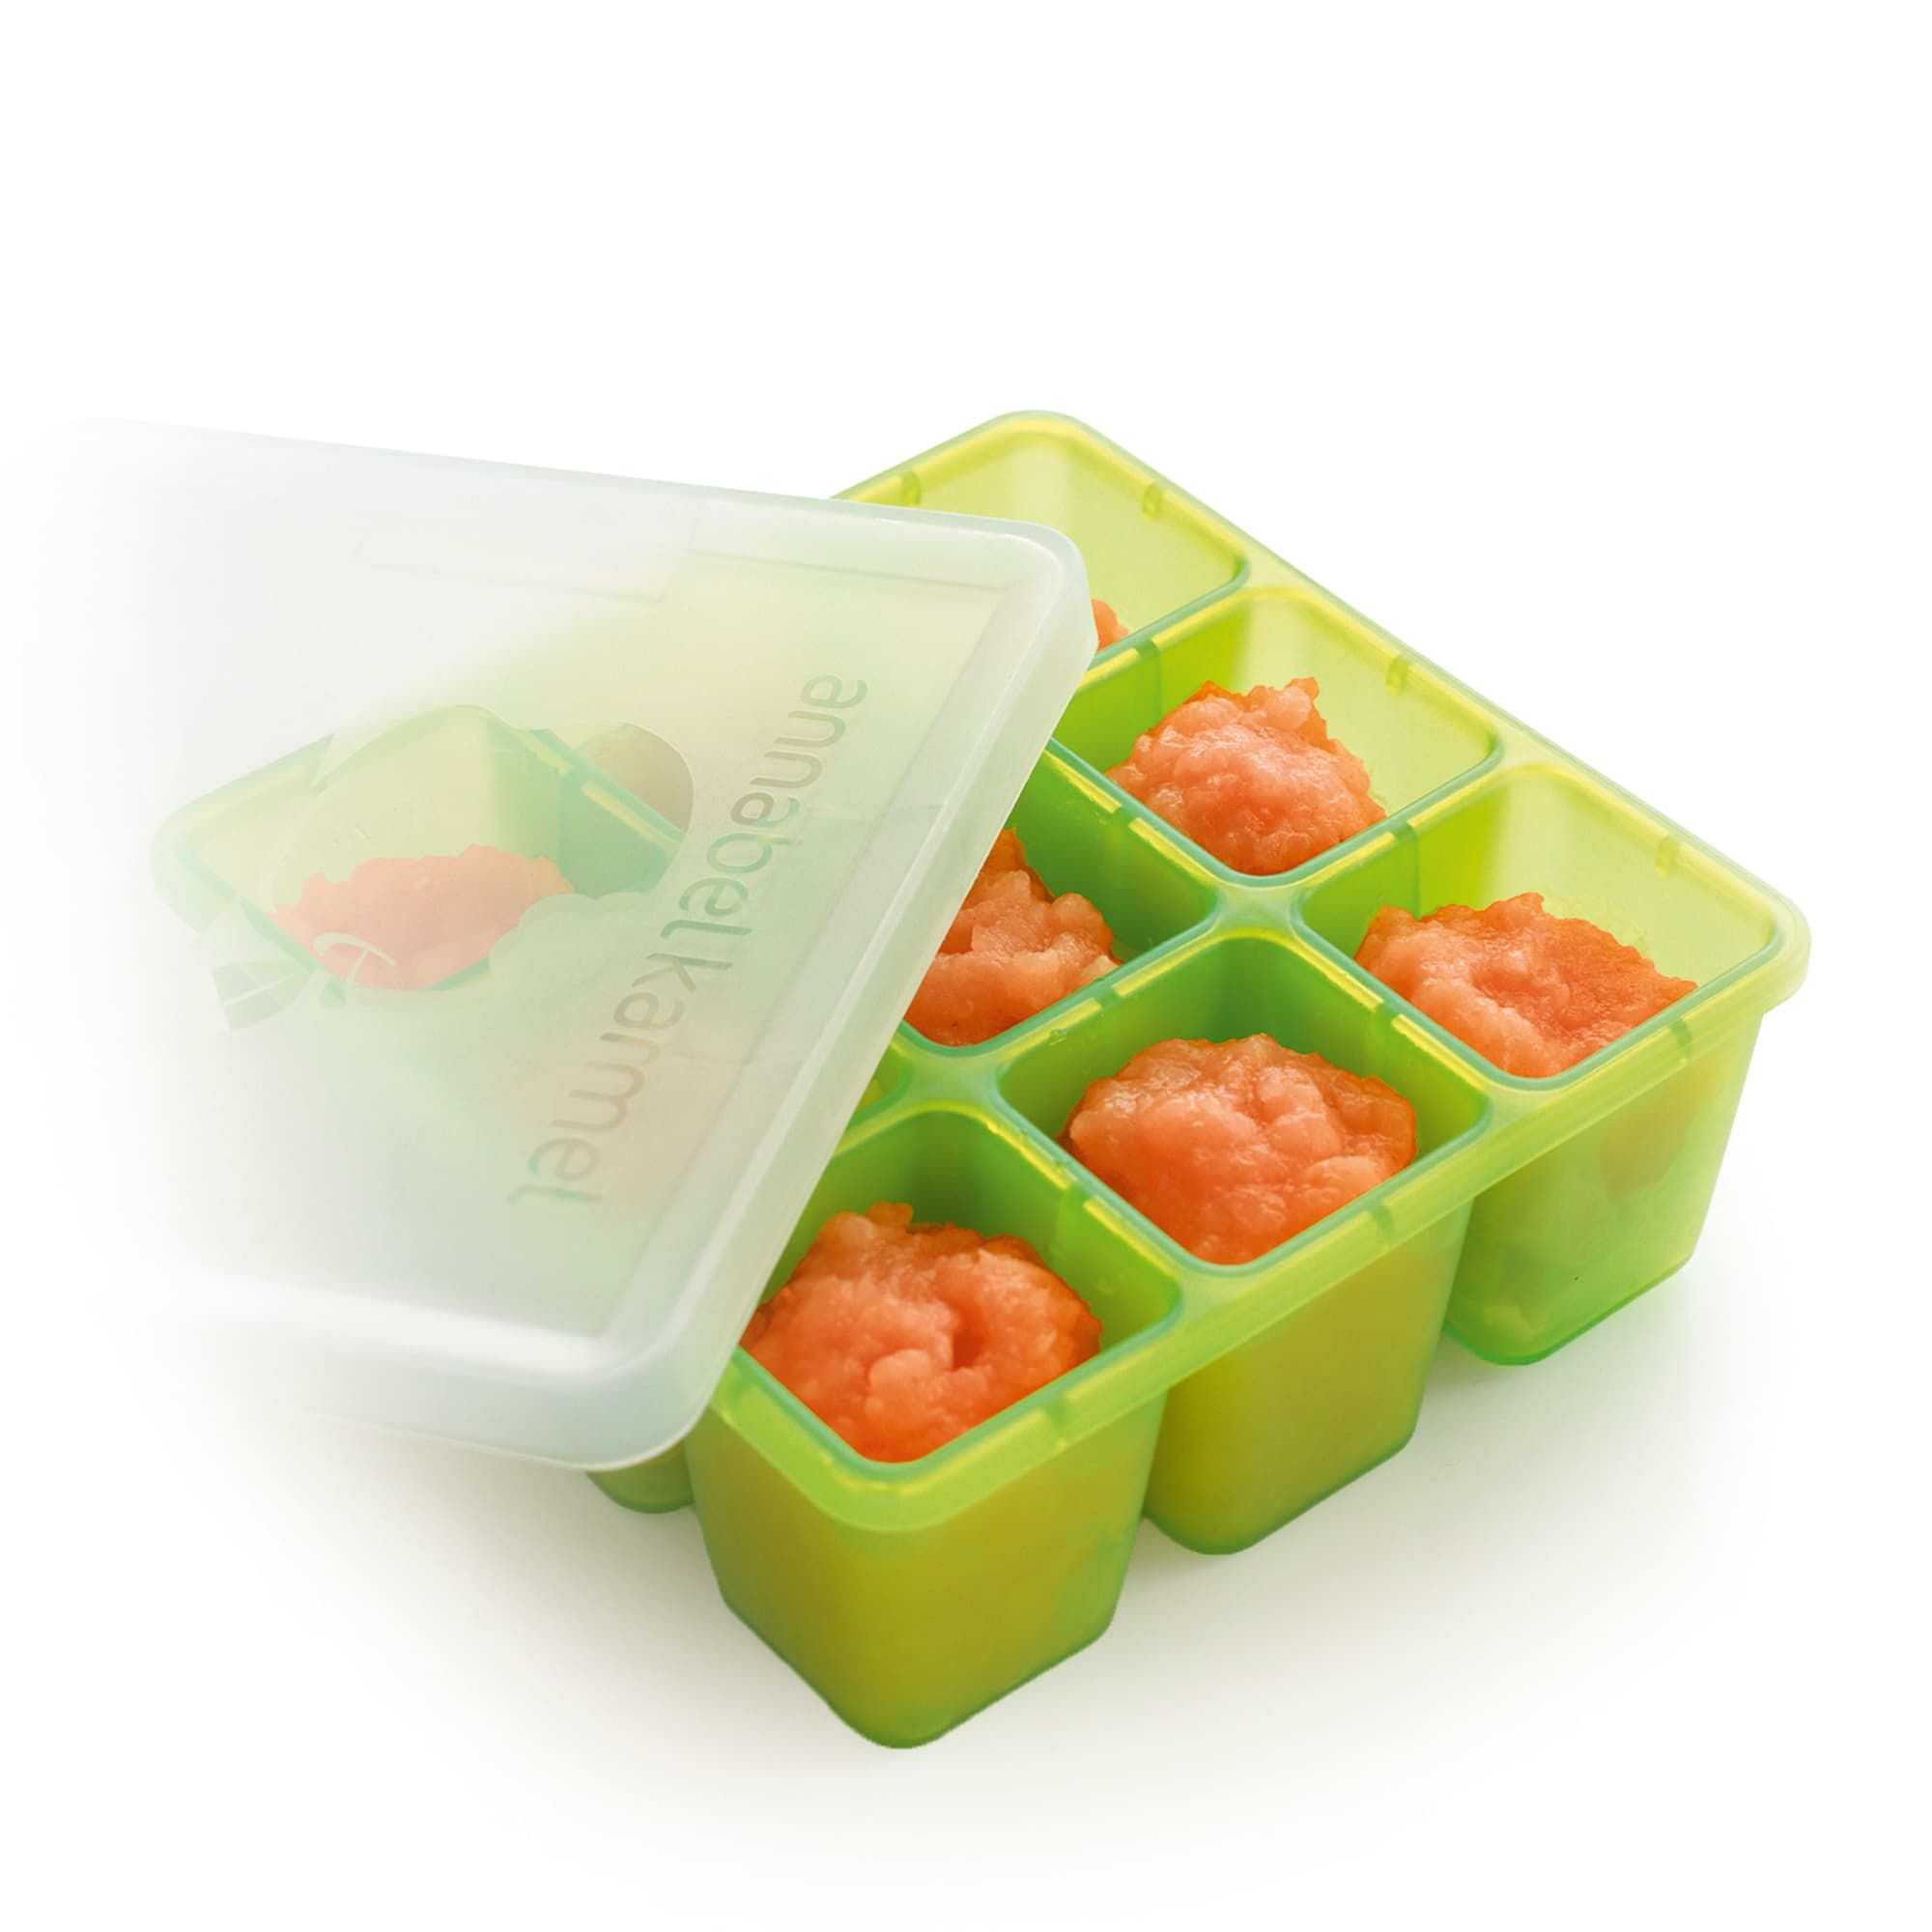 NUK Silicone Baby Food Freezer Tray, Green - image 2 of 6